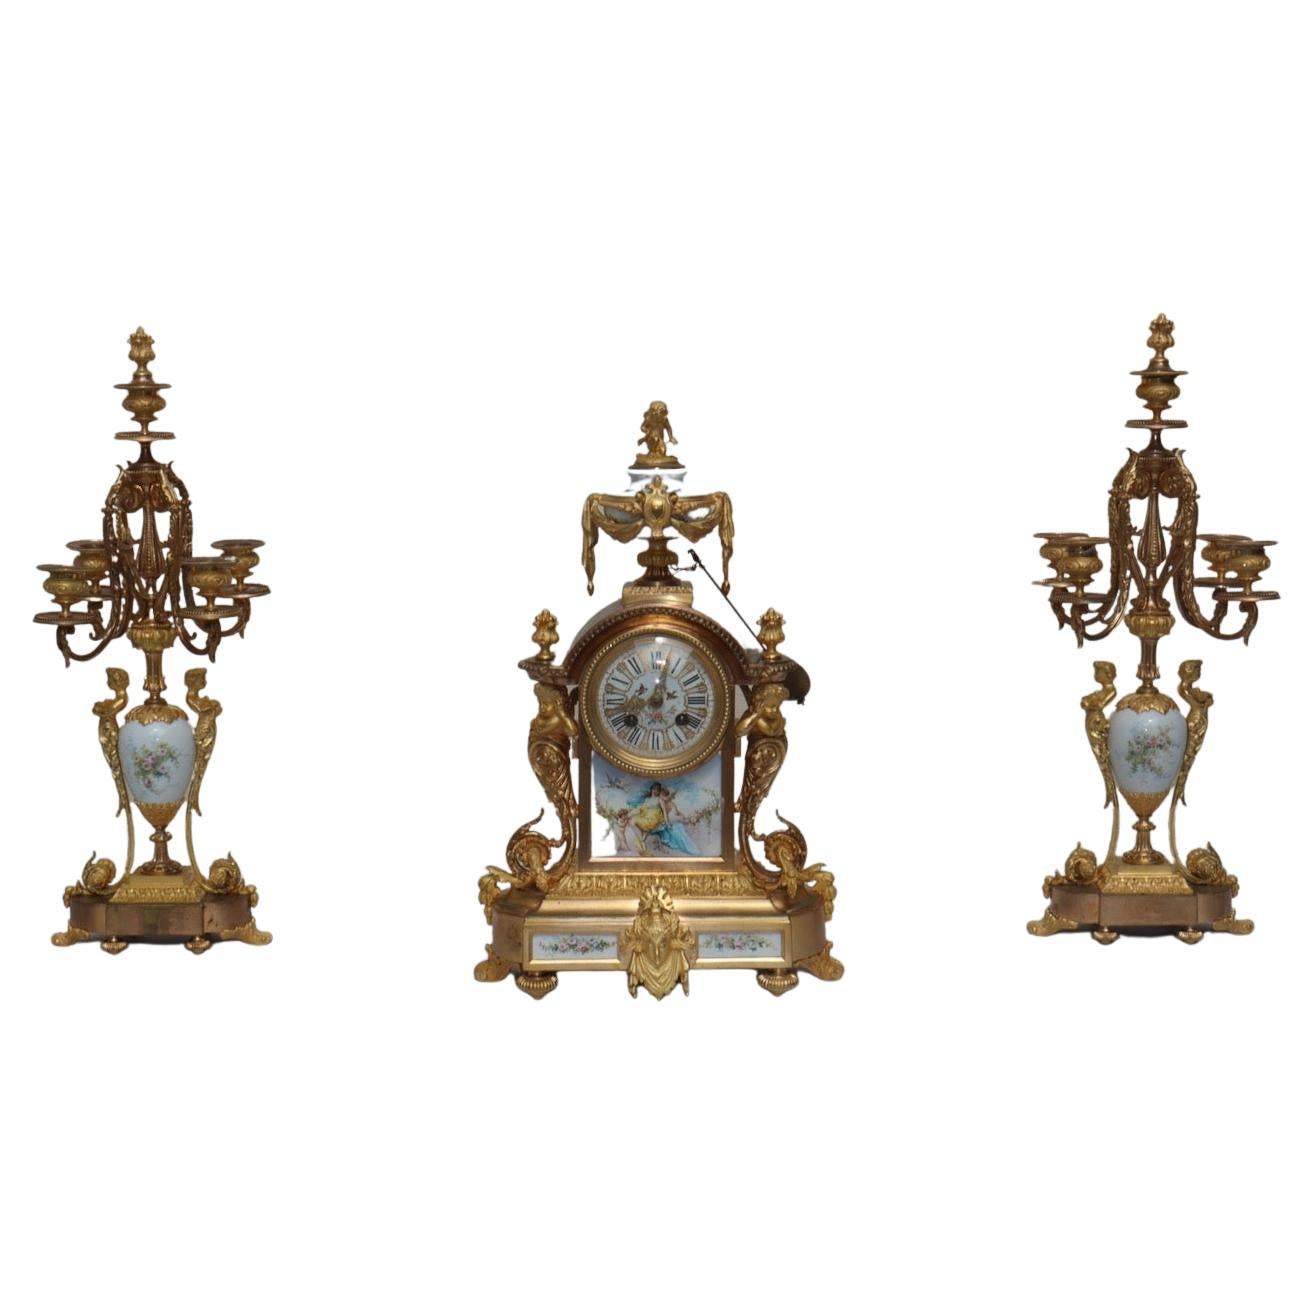 “Love”
A French Ormolu-Mounted, White-ground Sèvres Style Porcelain Three-Piece Clock Garniture
The clock with a hand-painted polychrome porcelain plaque decorated with a woman on clouds surrounded by Putti and lovebirds symbolizing Love, the